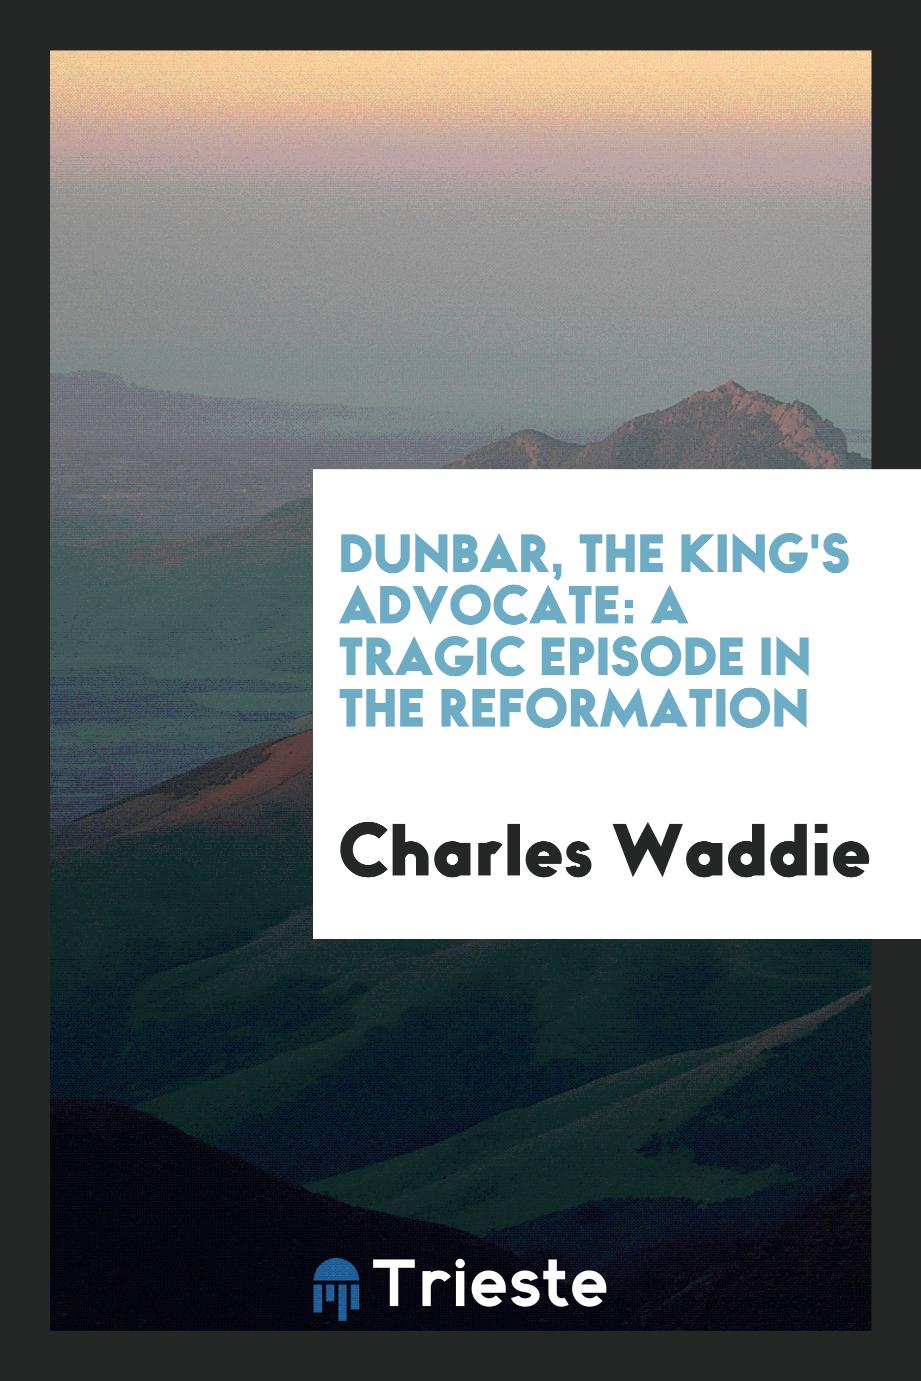 Dunbar, the King's Advocate: A Tragic Episode in the Reformation